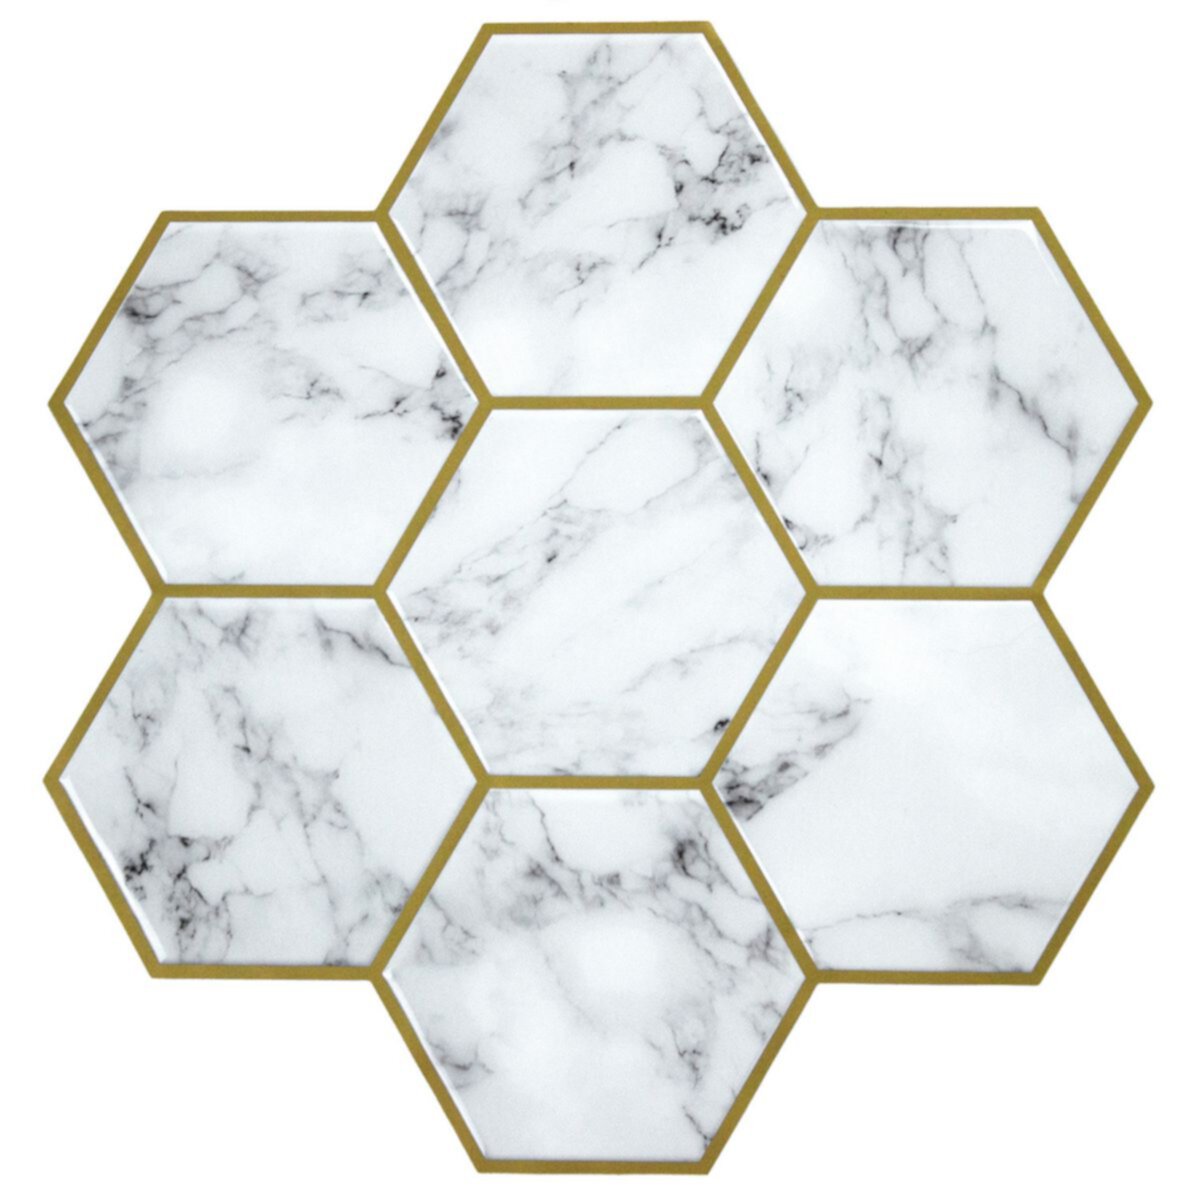 RoomMates Faux Marble Hexagon Stick Tile Wall Decal 4-piece Set RoomMates